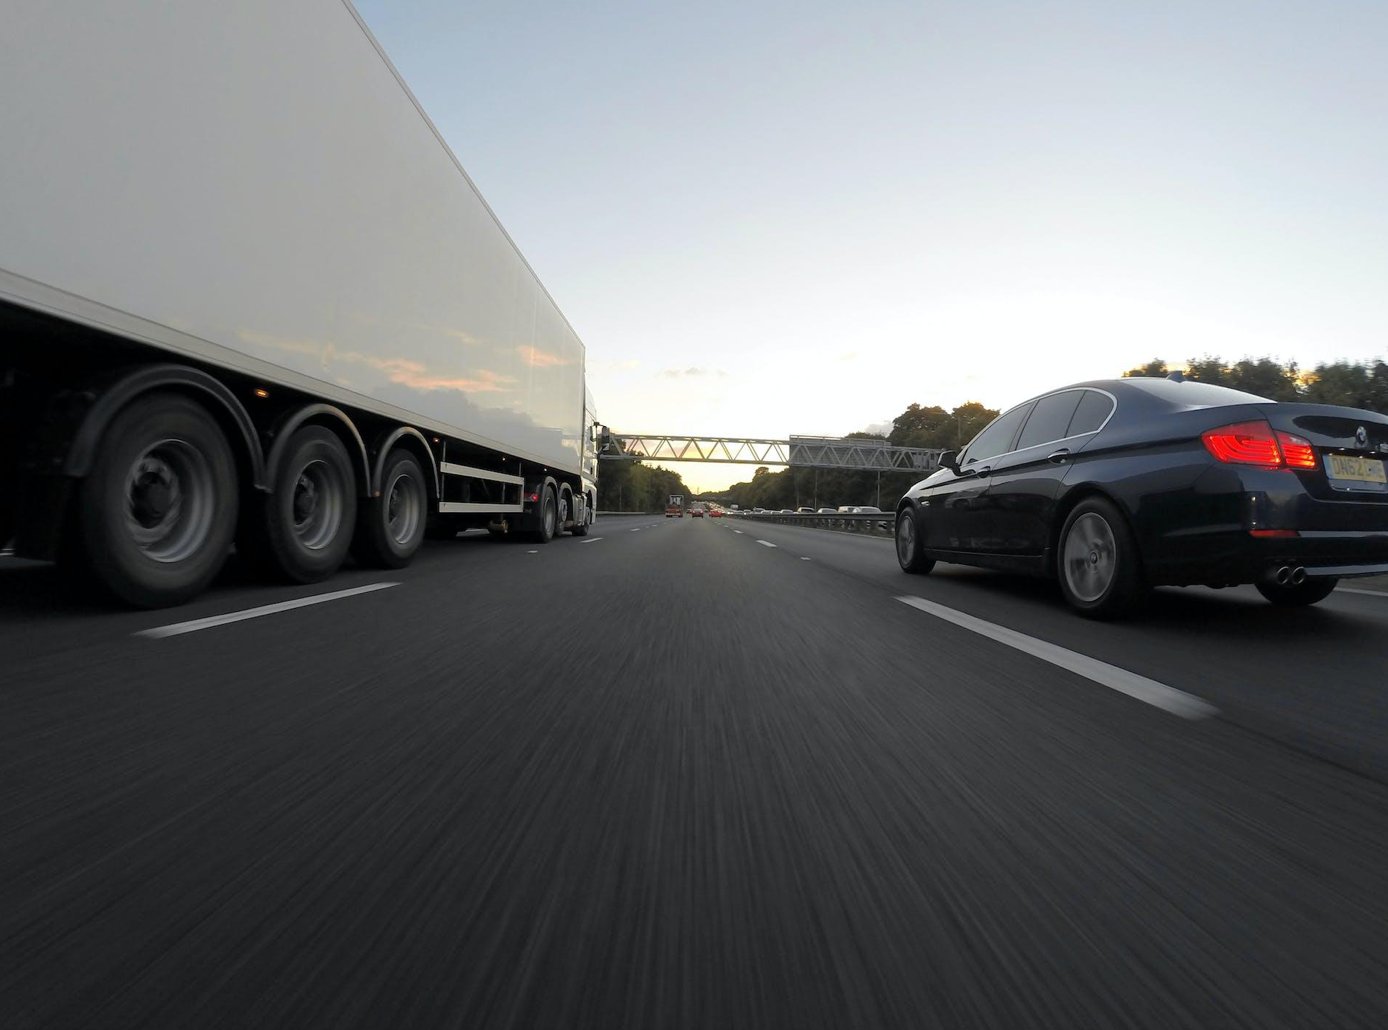 Blue Infiniti sedan on road with whith freight truck; image by Mike Bird, via Pexels.com.